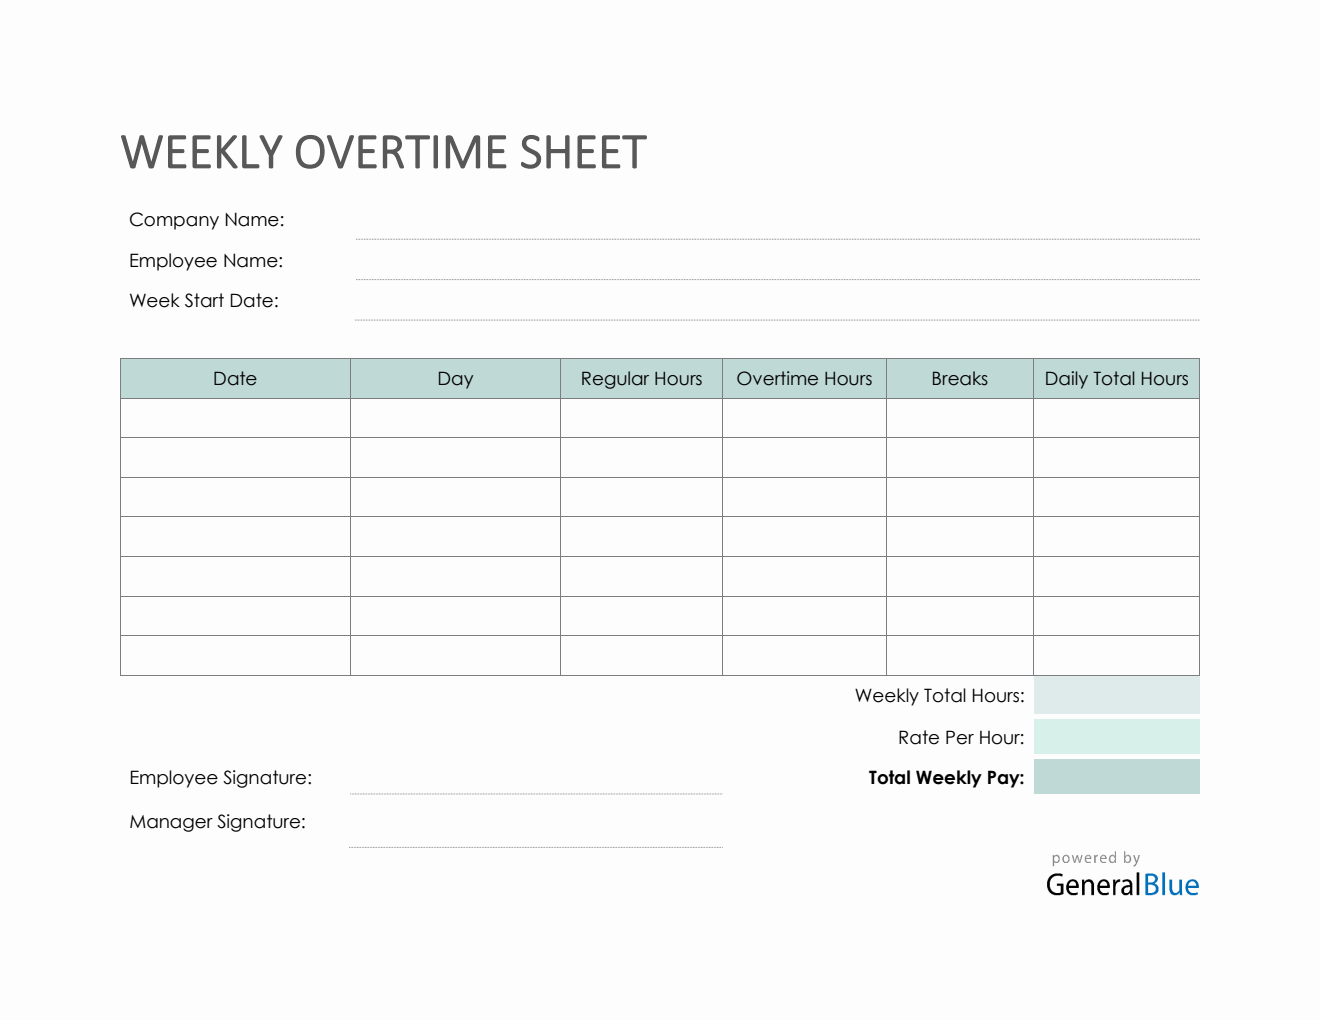 Weekly Overtime Sheet in PDF